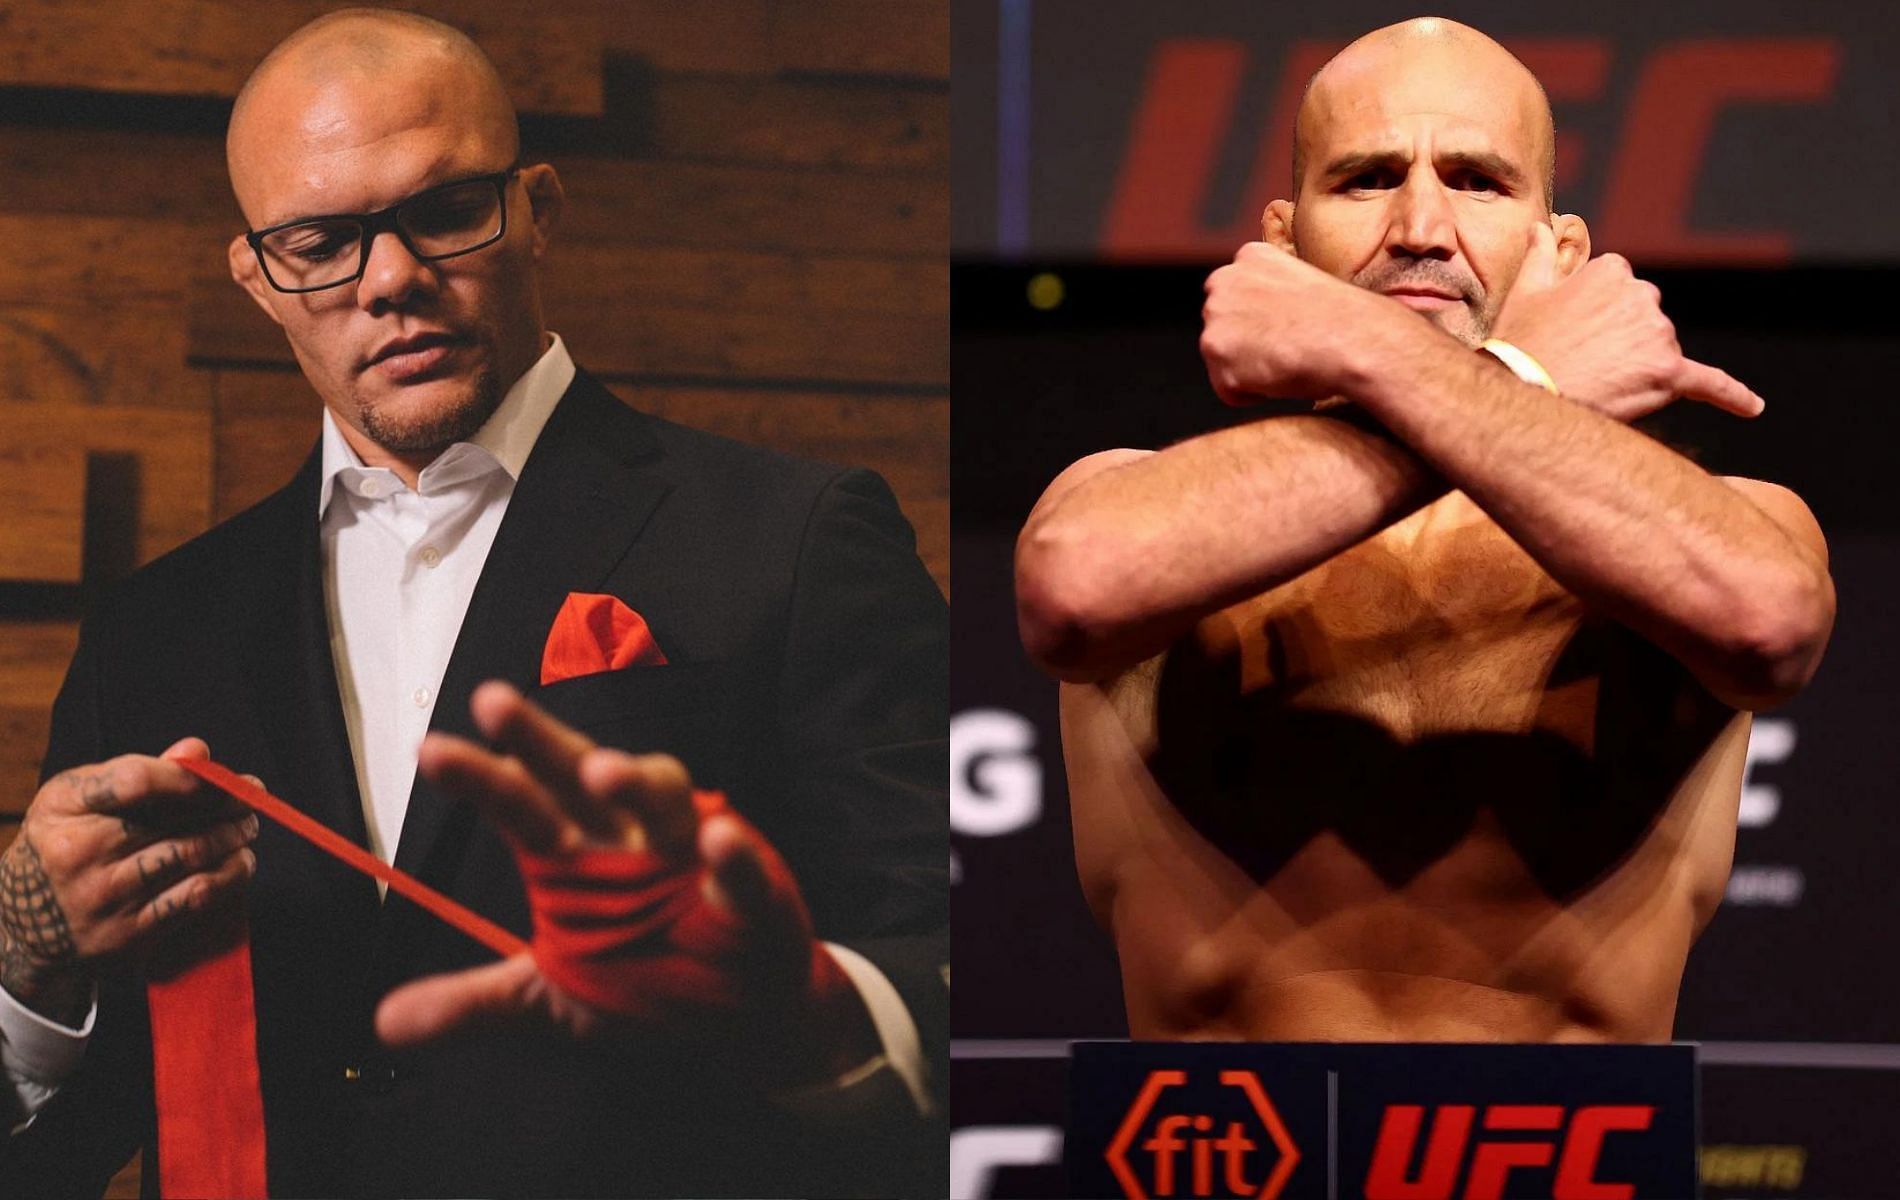 Anthony Smith (left) &amp; Glover Teixeira (right) [Image Credits- @lionheartasmith on Instagram]